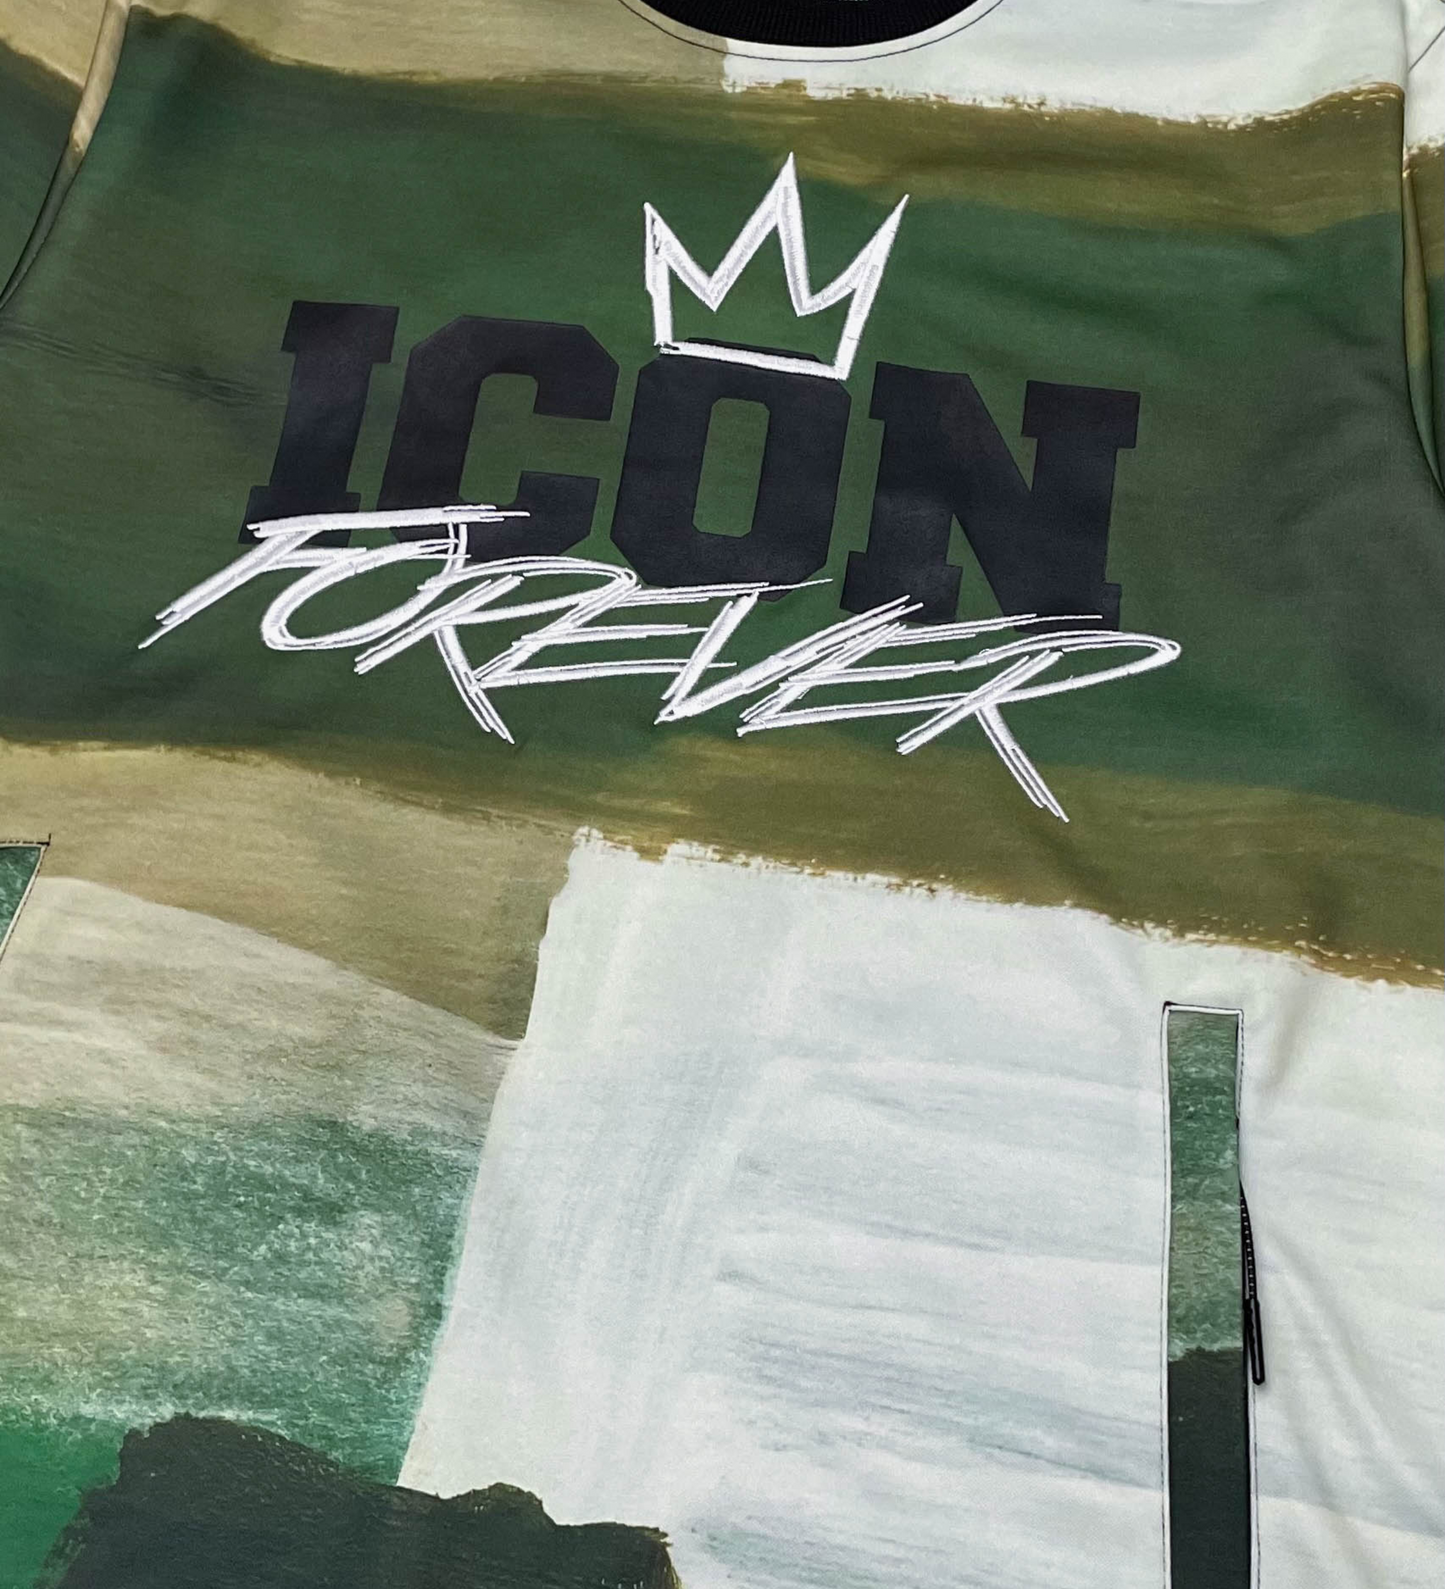 Icon Embroidered Poly Jersey Jogger Set